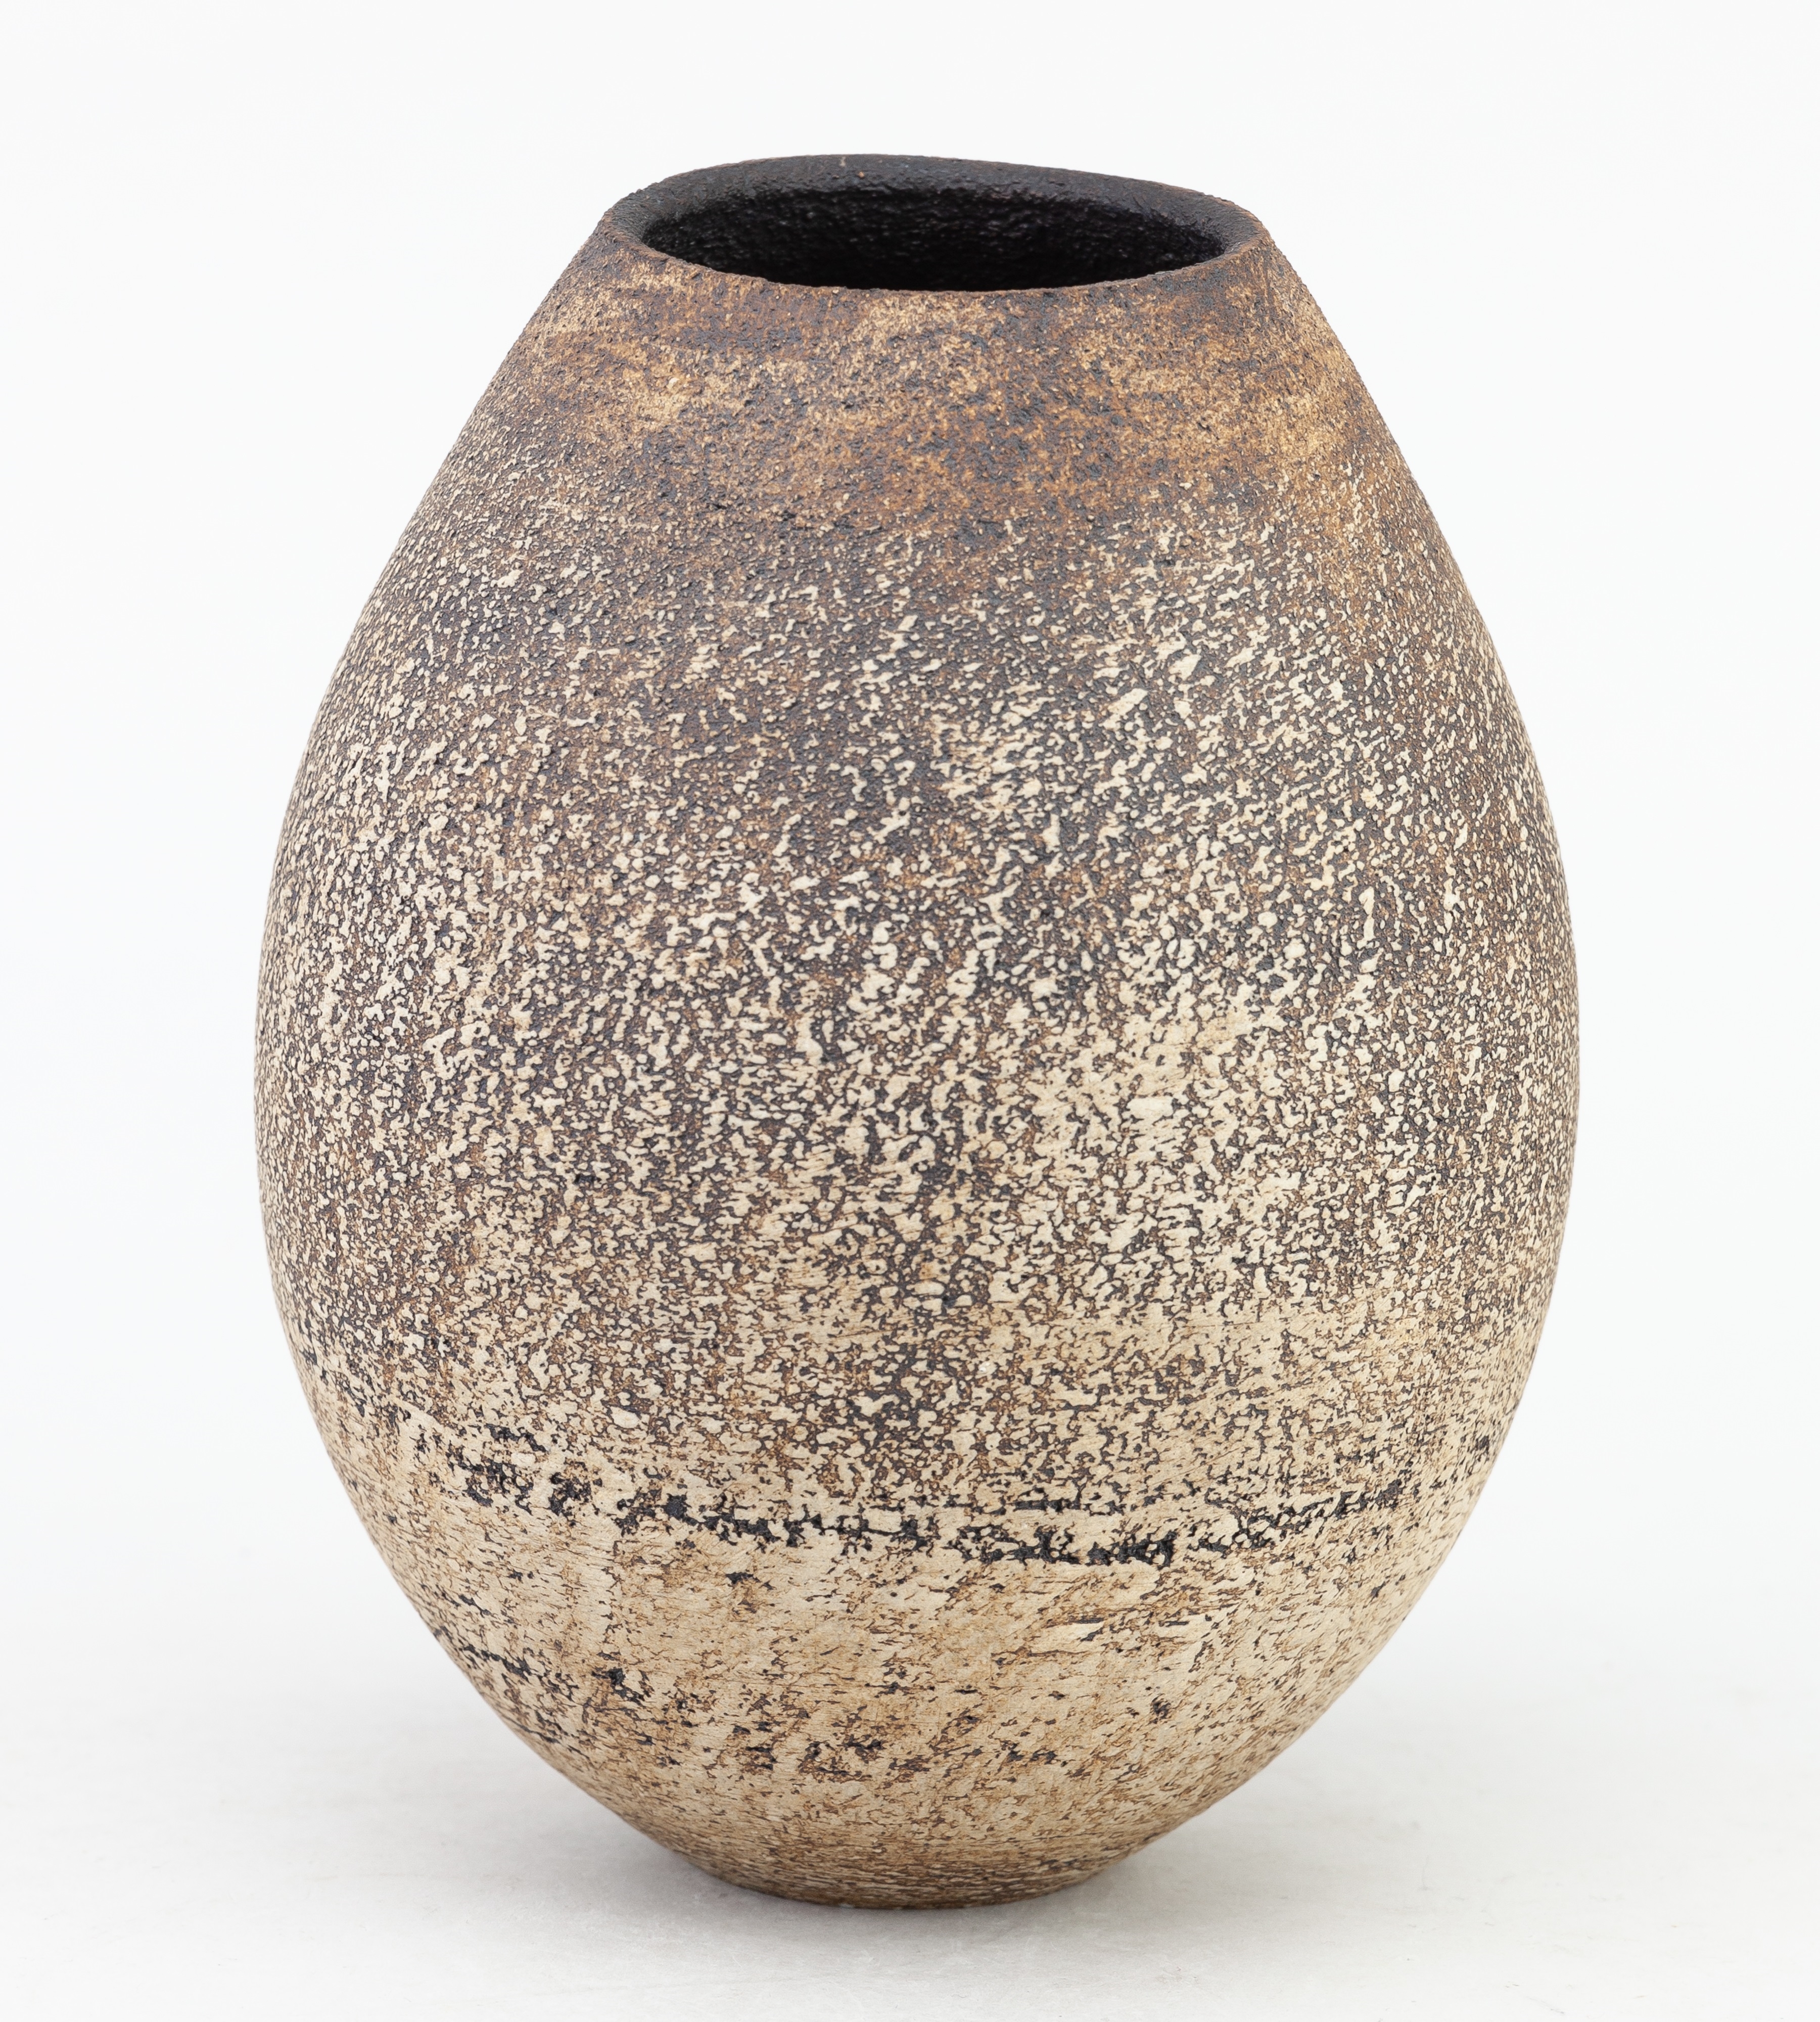 Artwork by Hans Coper, A bulbous stoneware vase in the manner of Hans Coper, Made of stoneware